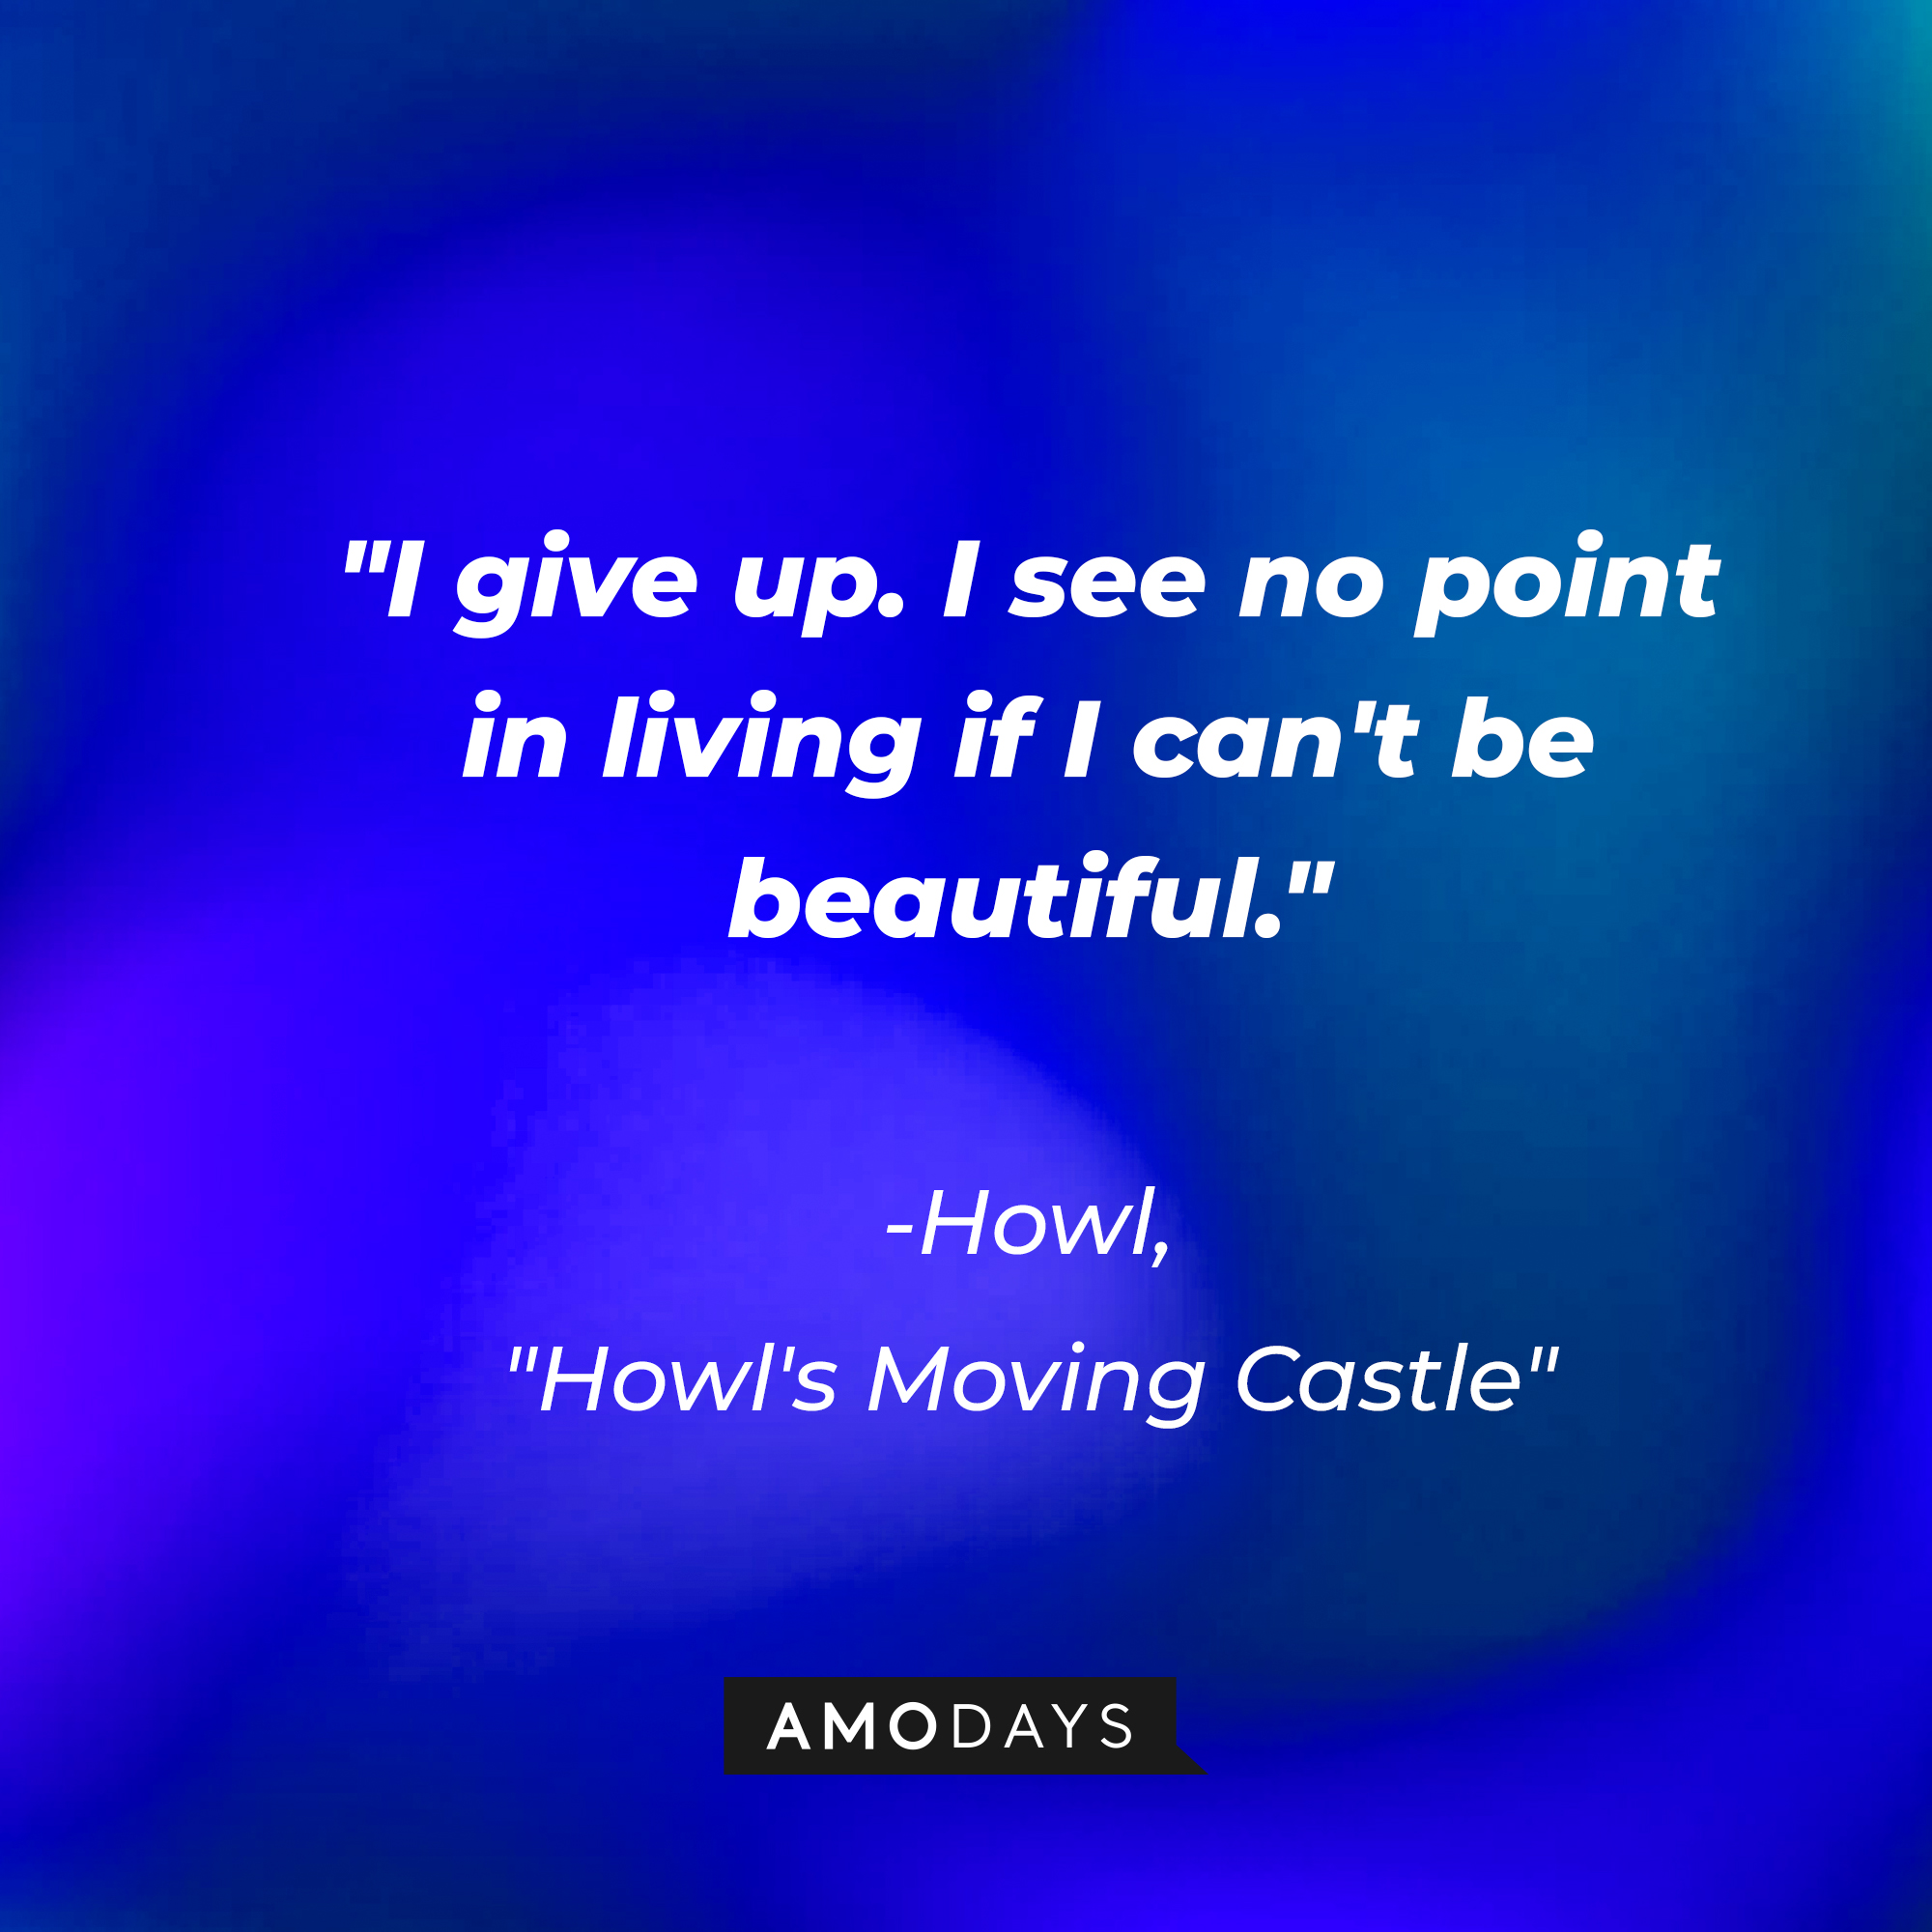 Howl's quote in "Howl's Moving Castle:" "I give up. I see no point in living if I can't be beautiful." | Source: AmoDays